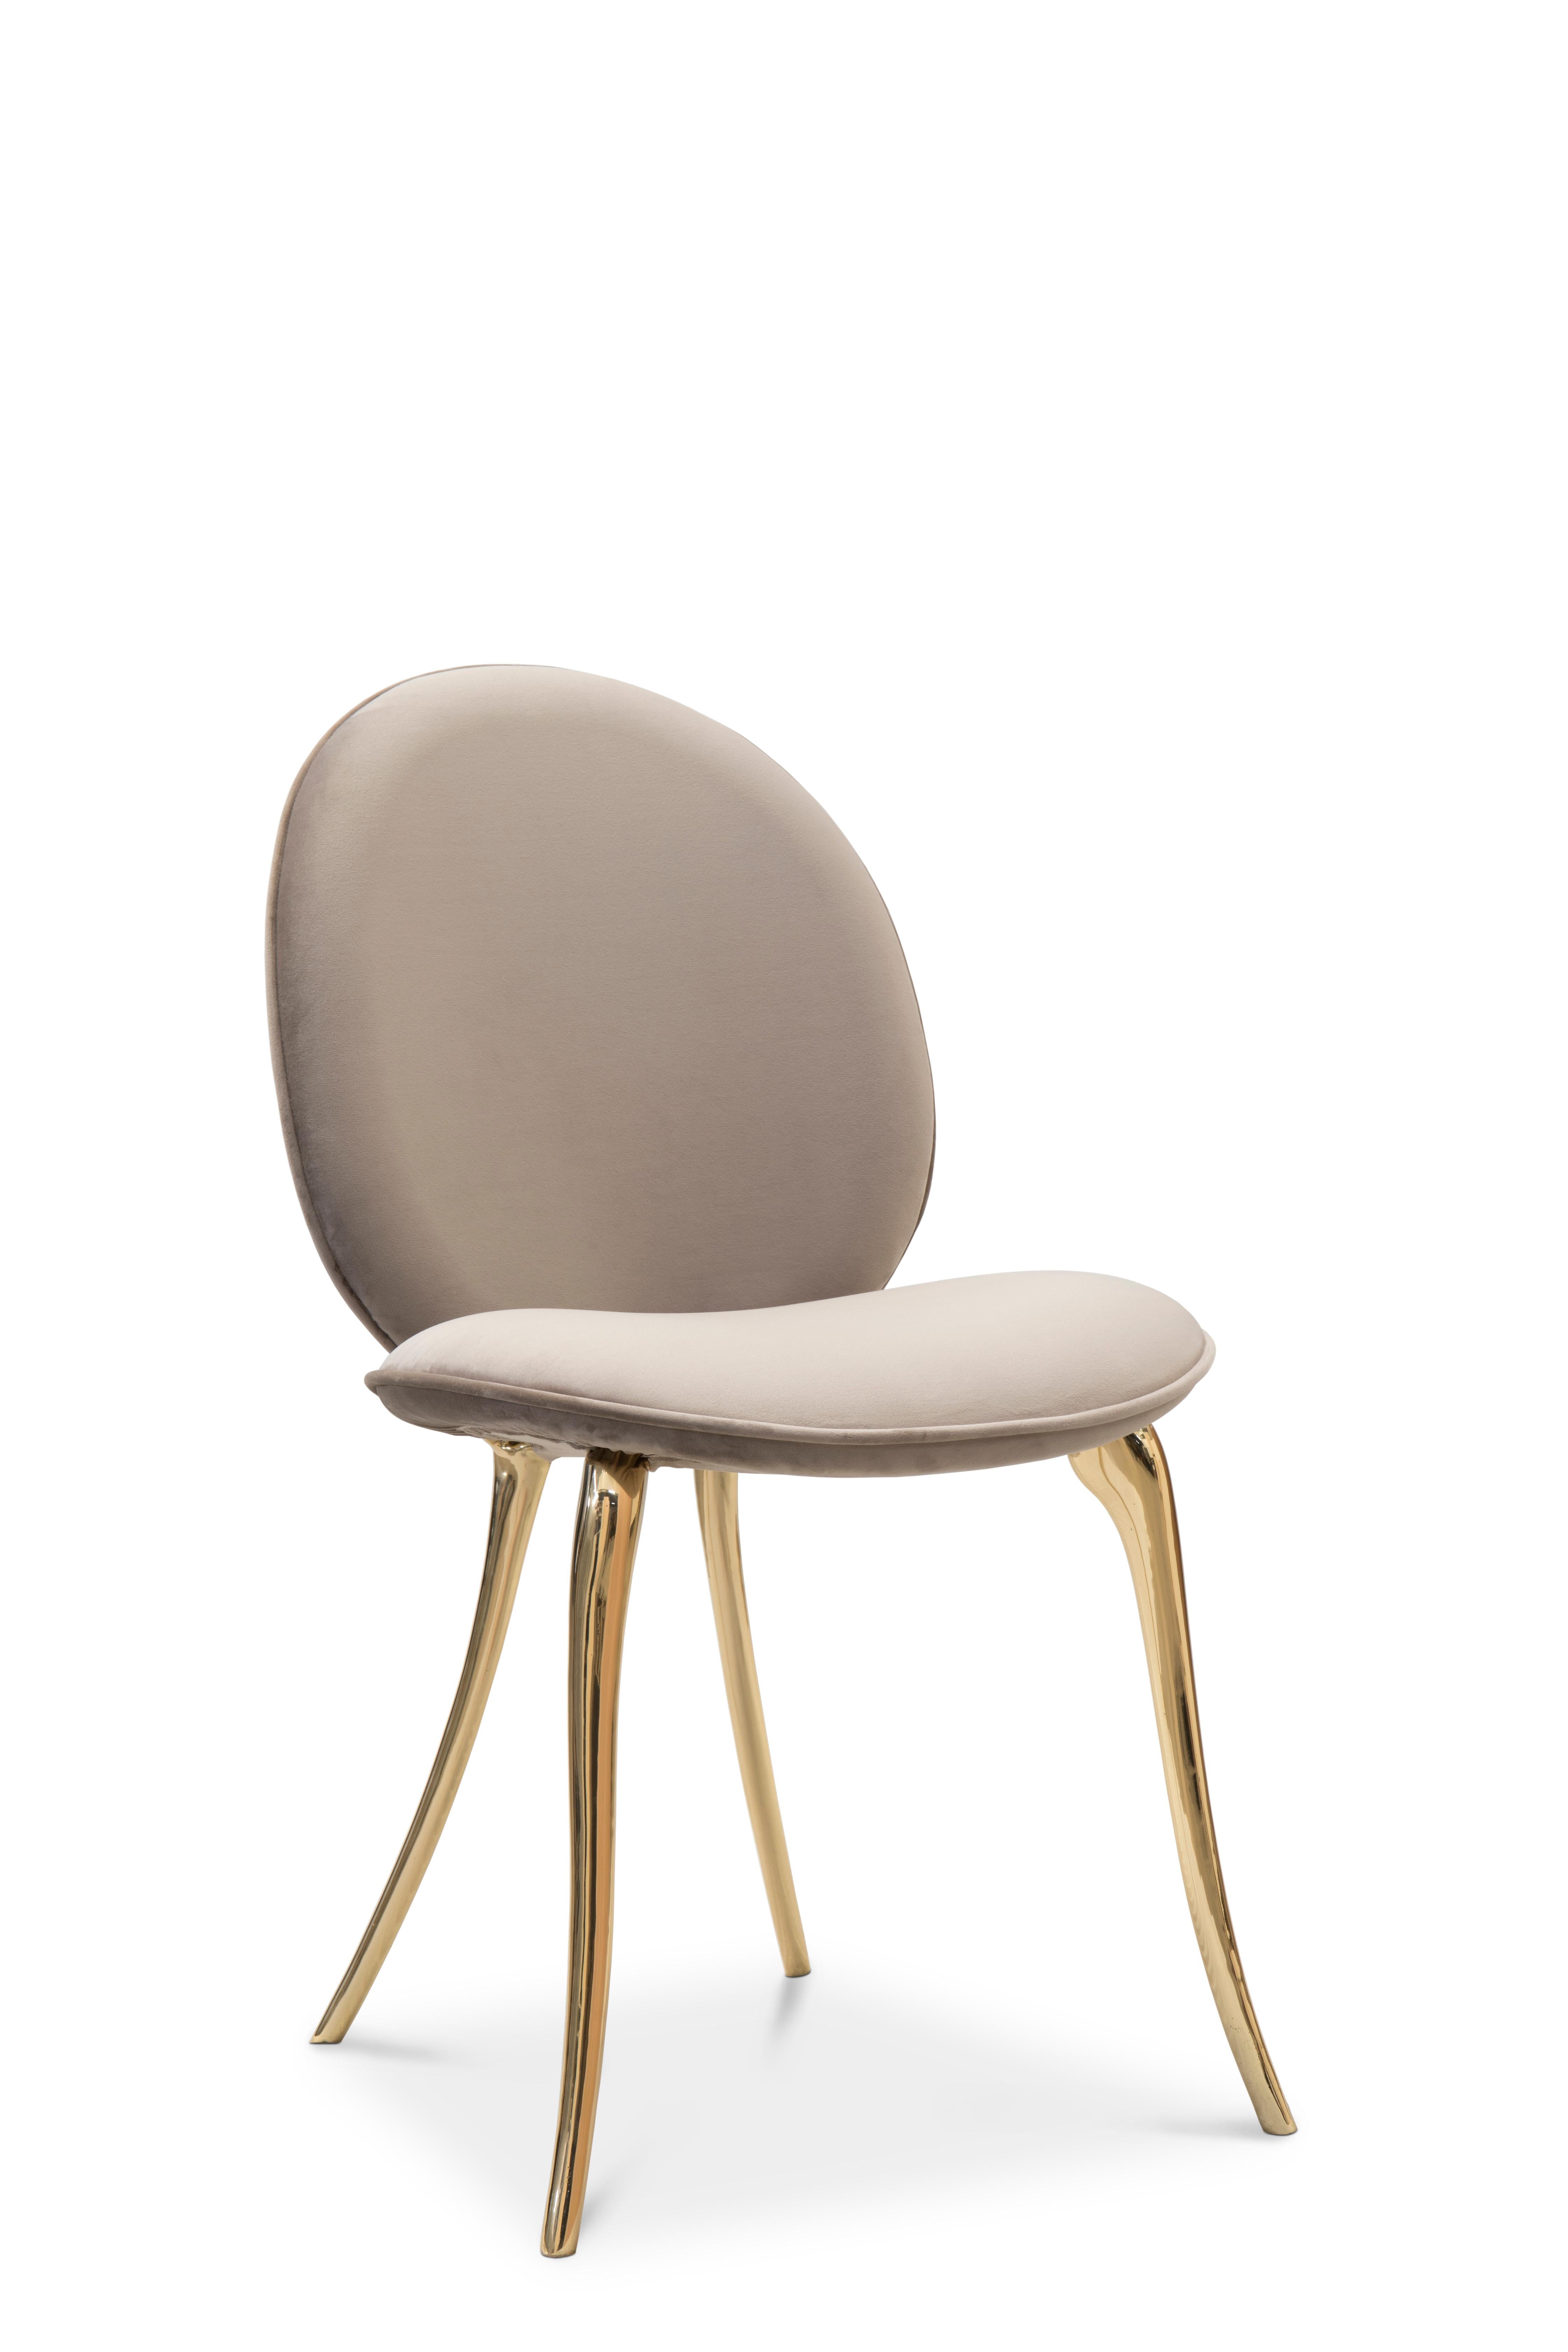 Modern Contemporary Soleil Dining Chair Polished Casted Brass by Boca do Lobo

Modern Contemporary Soleil Dining Chair has a polished casted brass and Aldeco sucesso 29 fabric. Soleil chair is a synthesis of styles and senses. The perfect seating